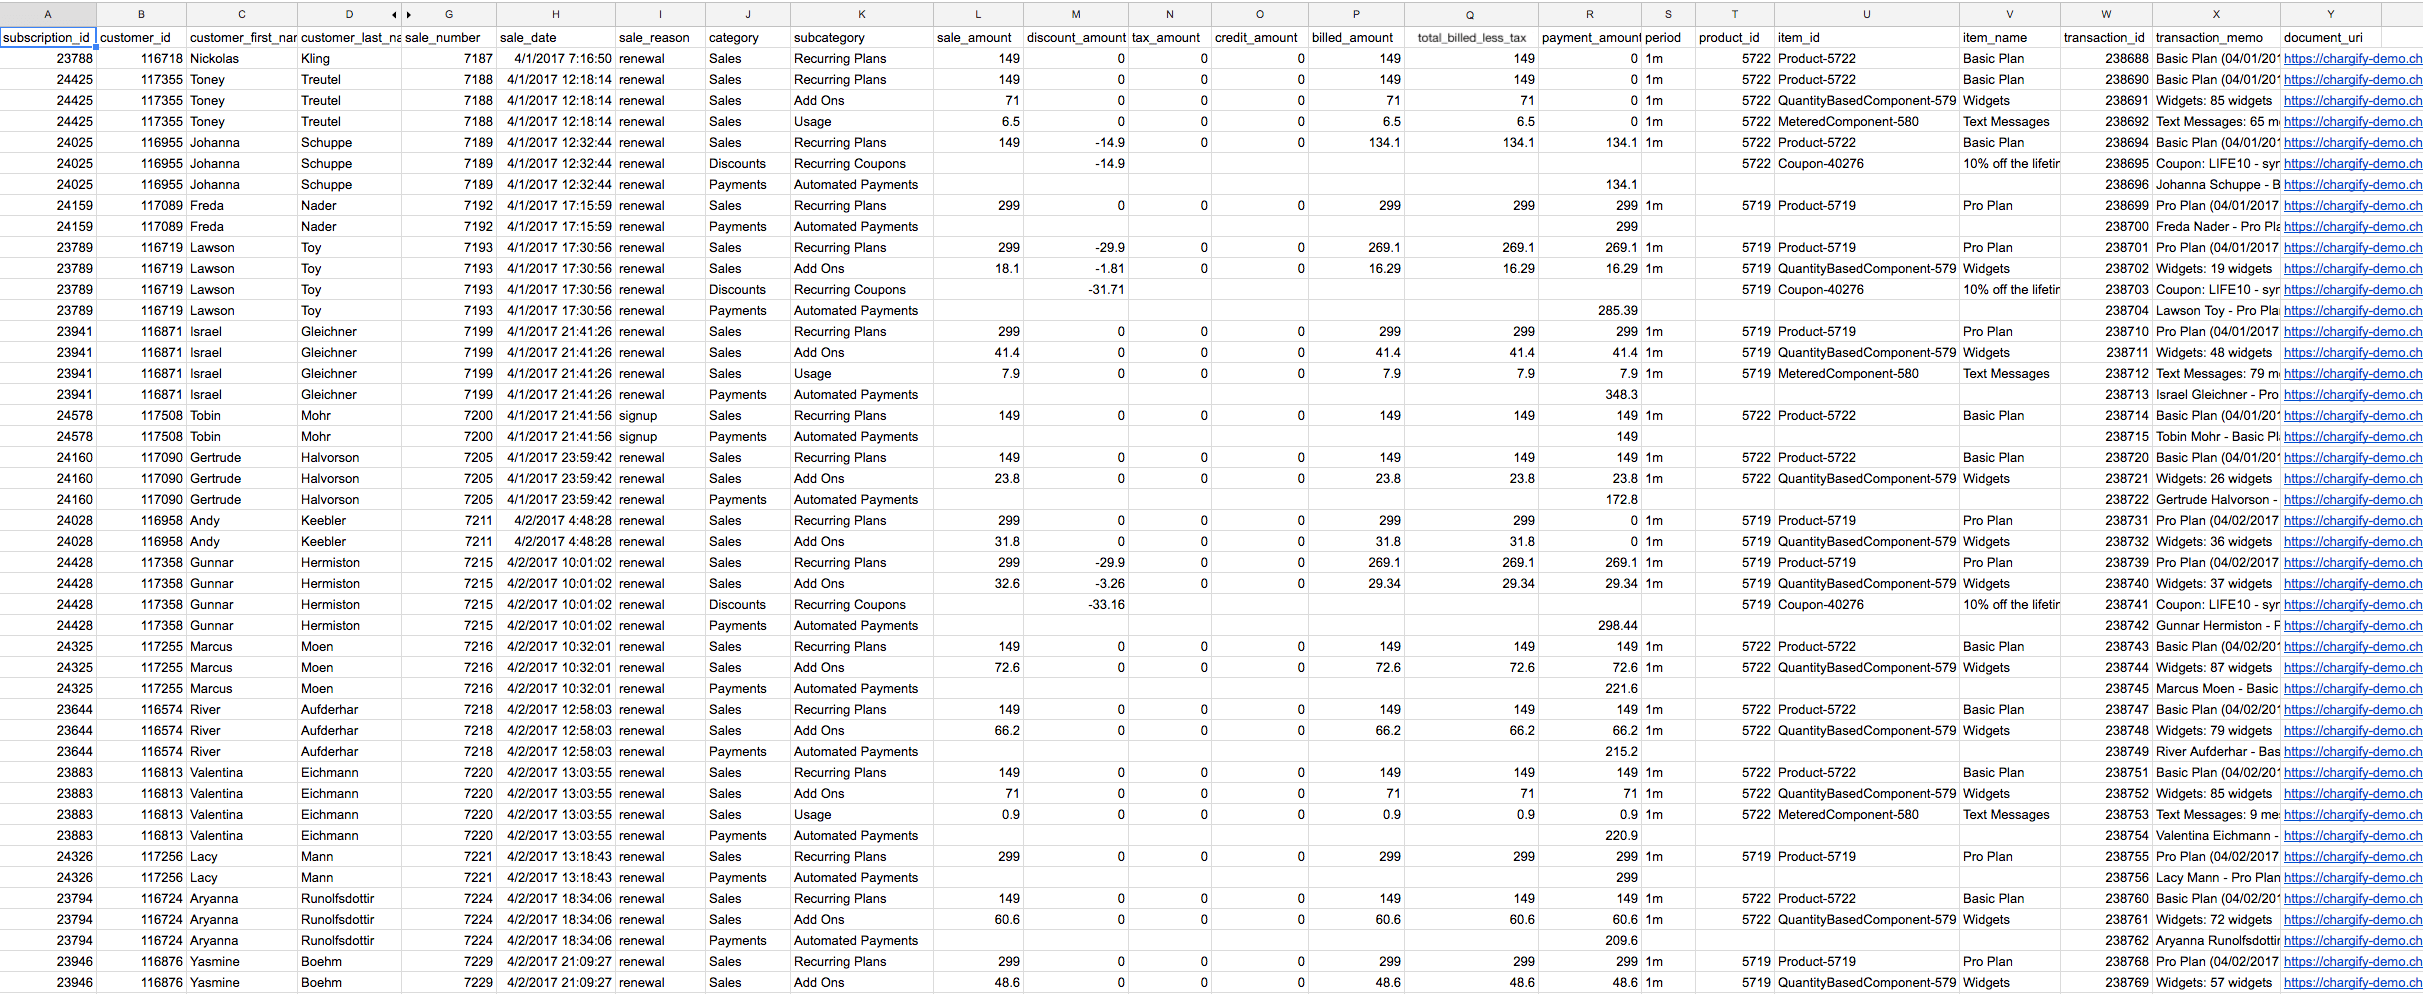 spreadsheet.png